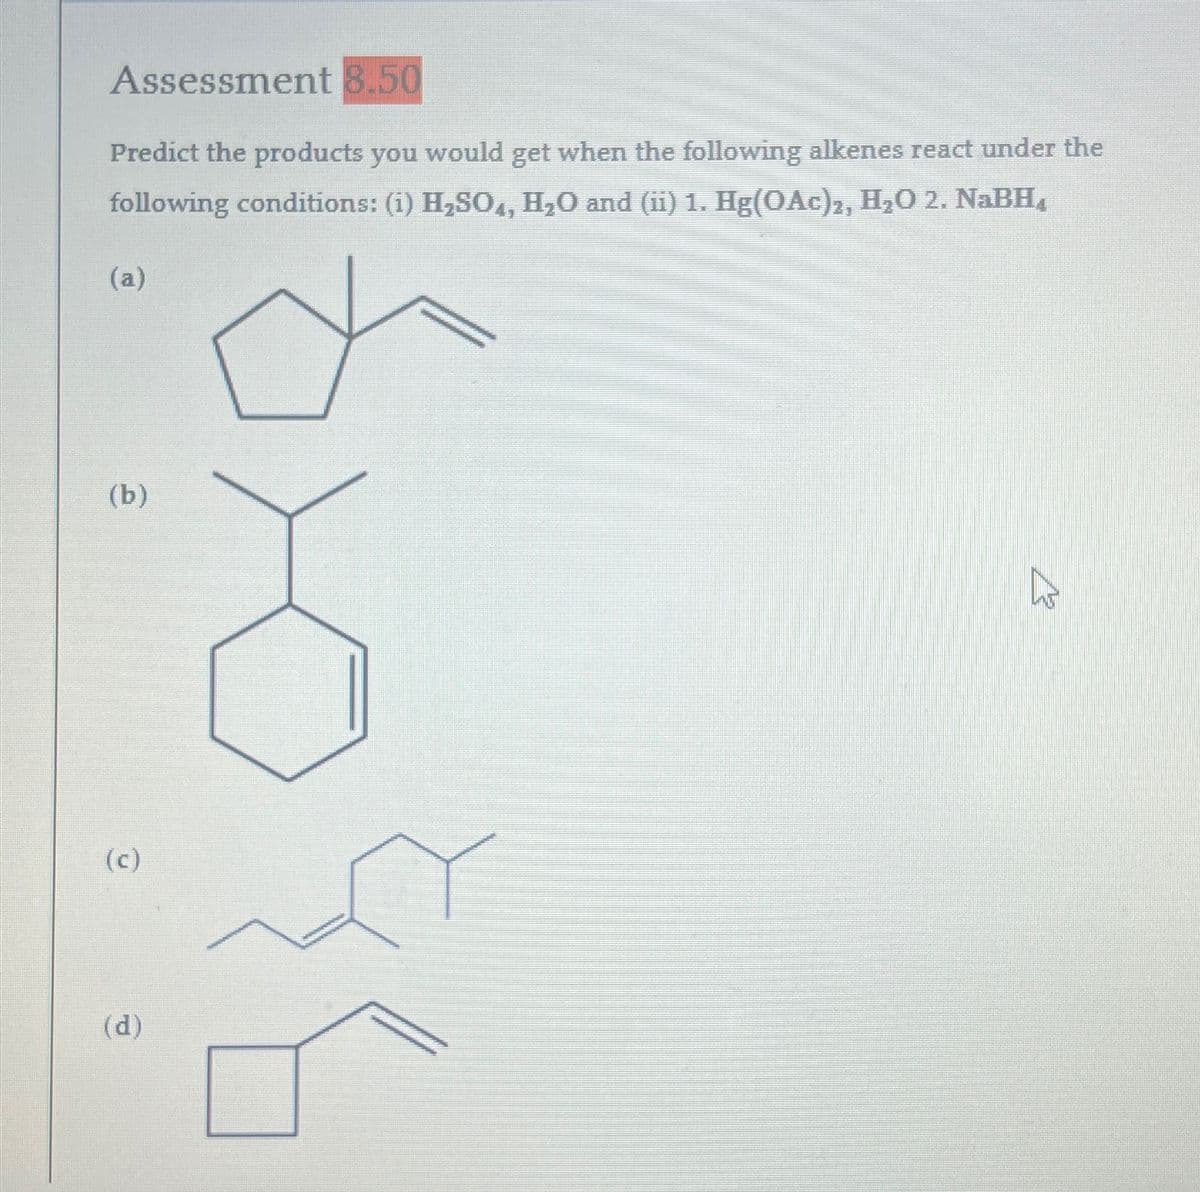 Assessment 8.50
Predict the products you would get when the following alkenes react under the
following conditions: (i) H₂SO4, H₂O and (ii) 1. Hg(OAc)2, H₂O 2. NaBH
(a)
(b)
(c)
(d)
13